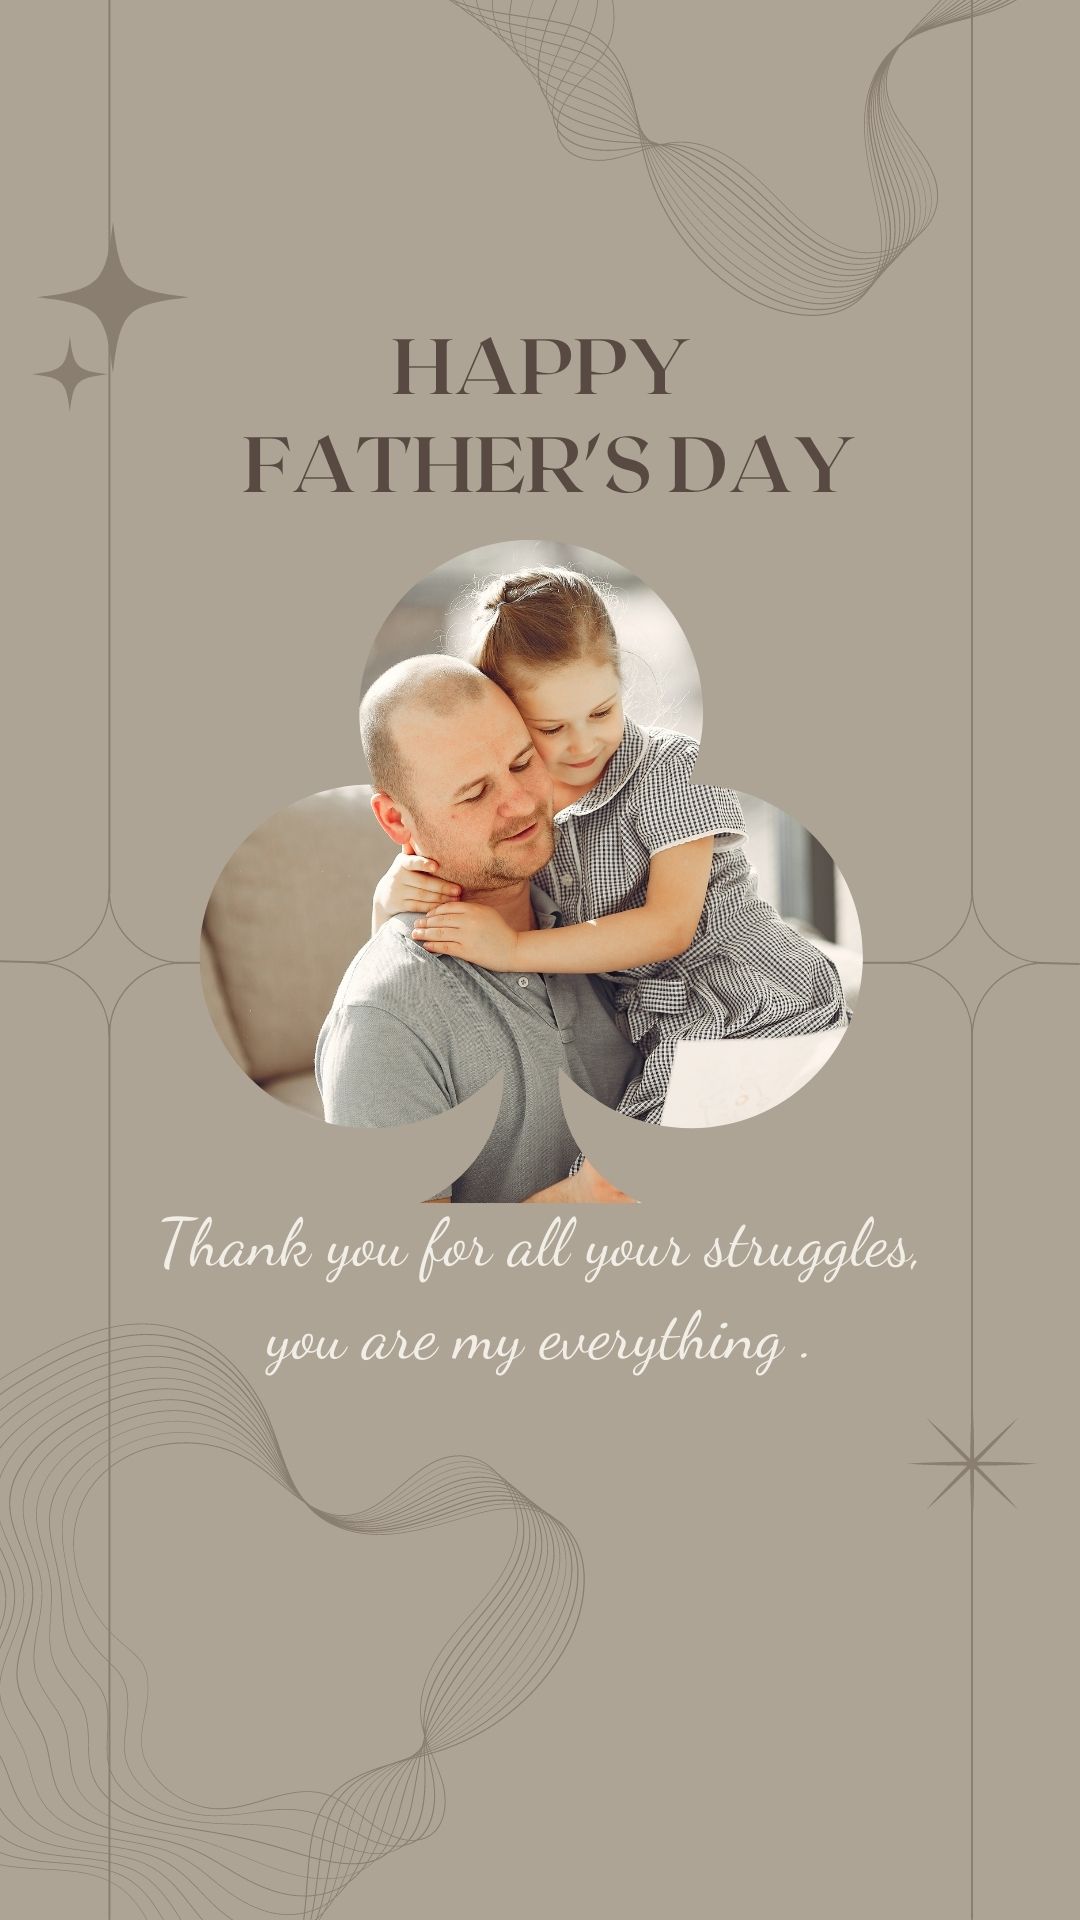 best happy father's day wishes images for instagram story (16)